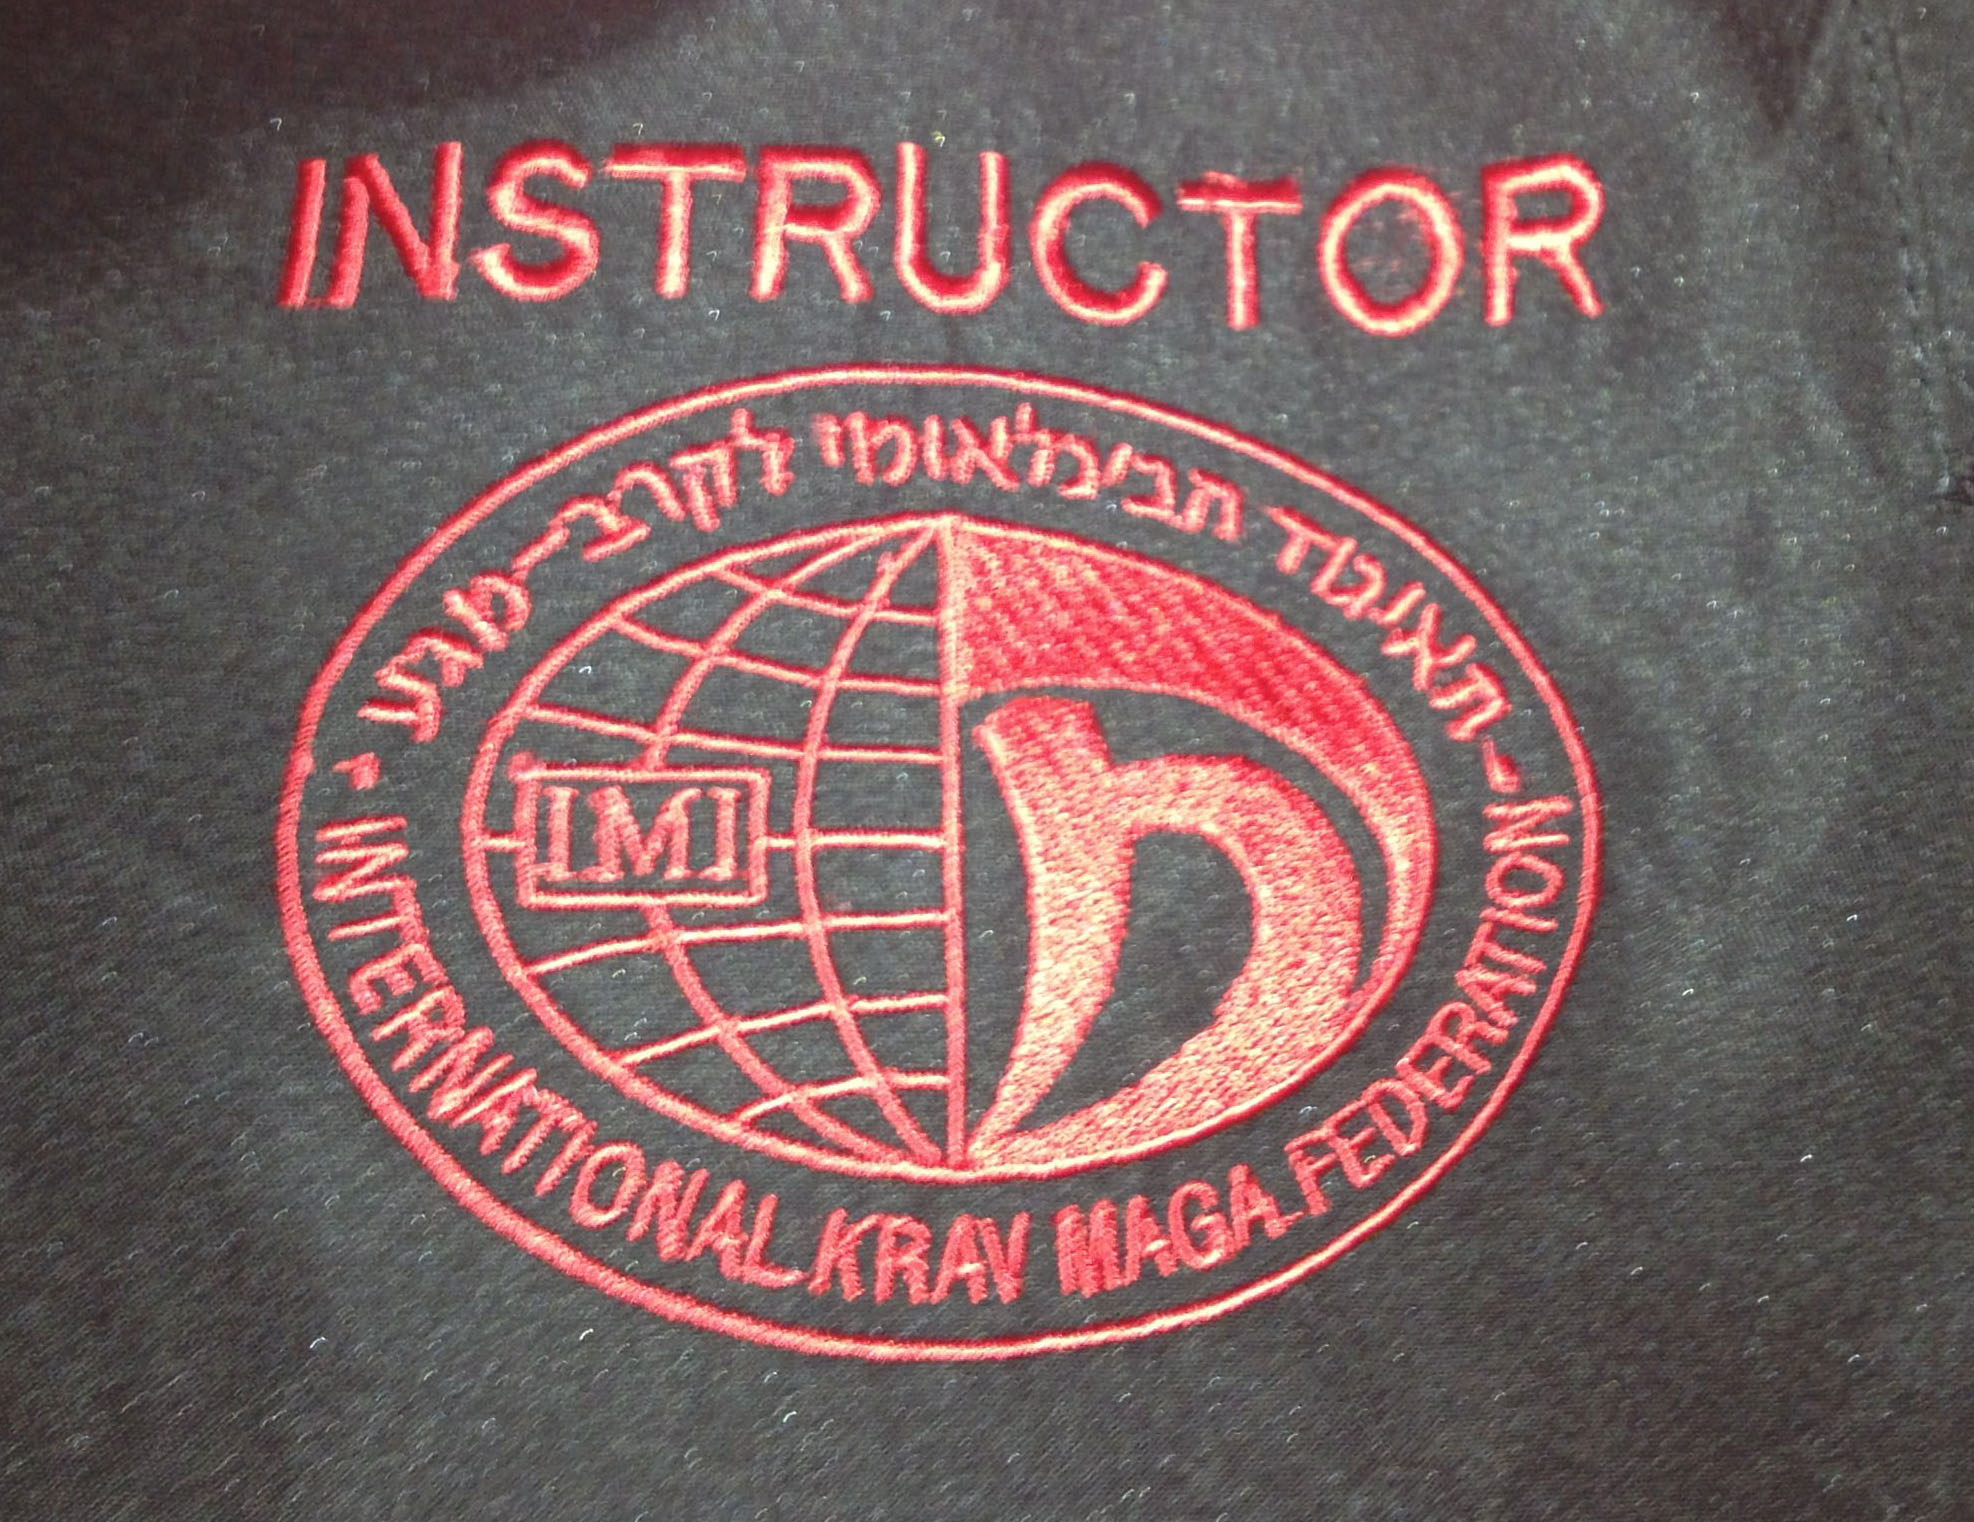 “It’ s a long way to the top, if you wanna… Krav Maga”!